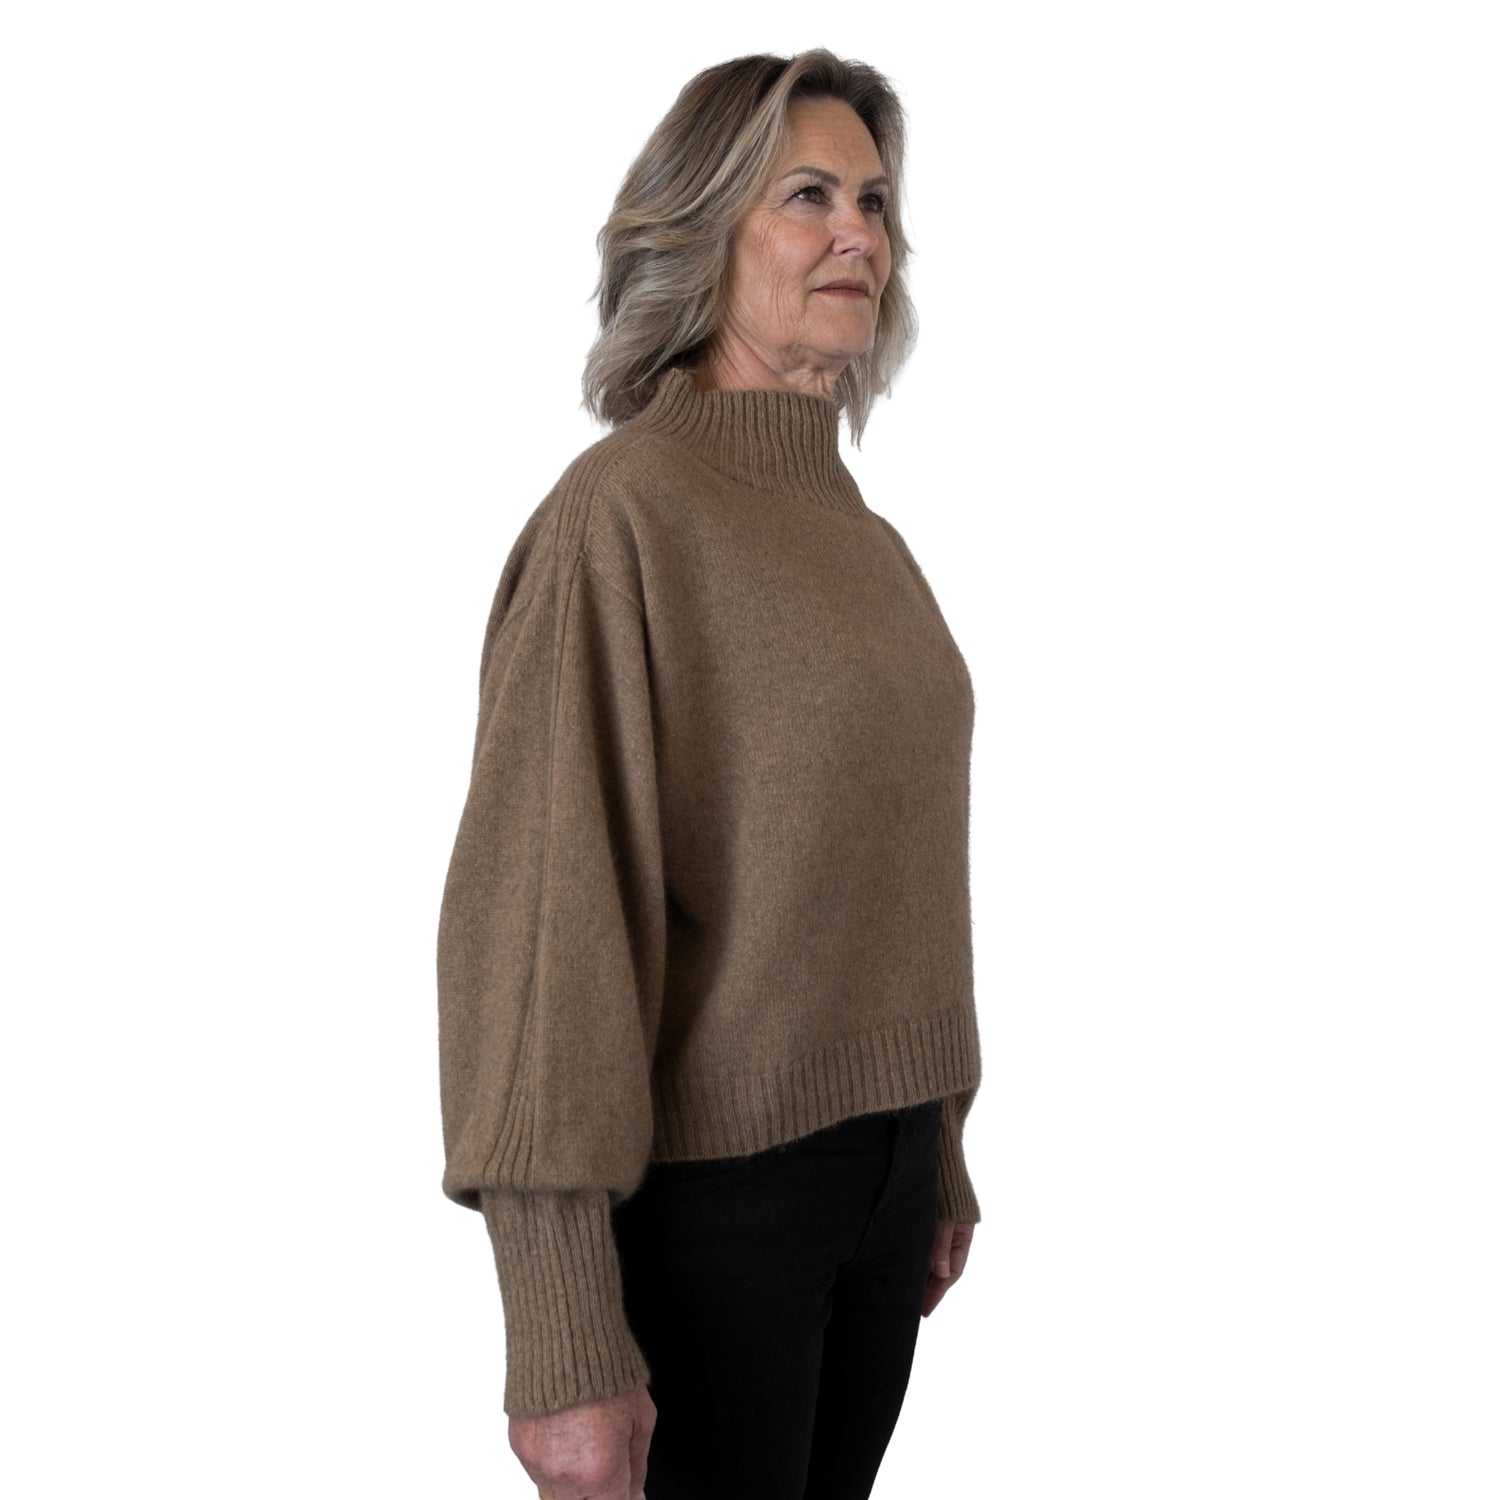 Bell sleeve in colour Caramel. Side